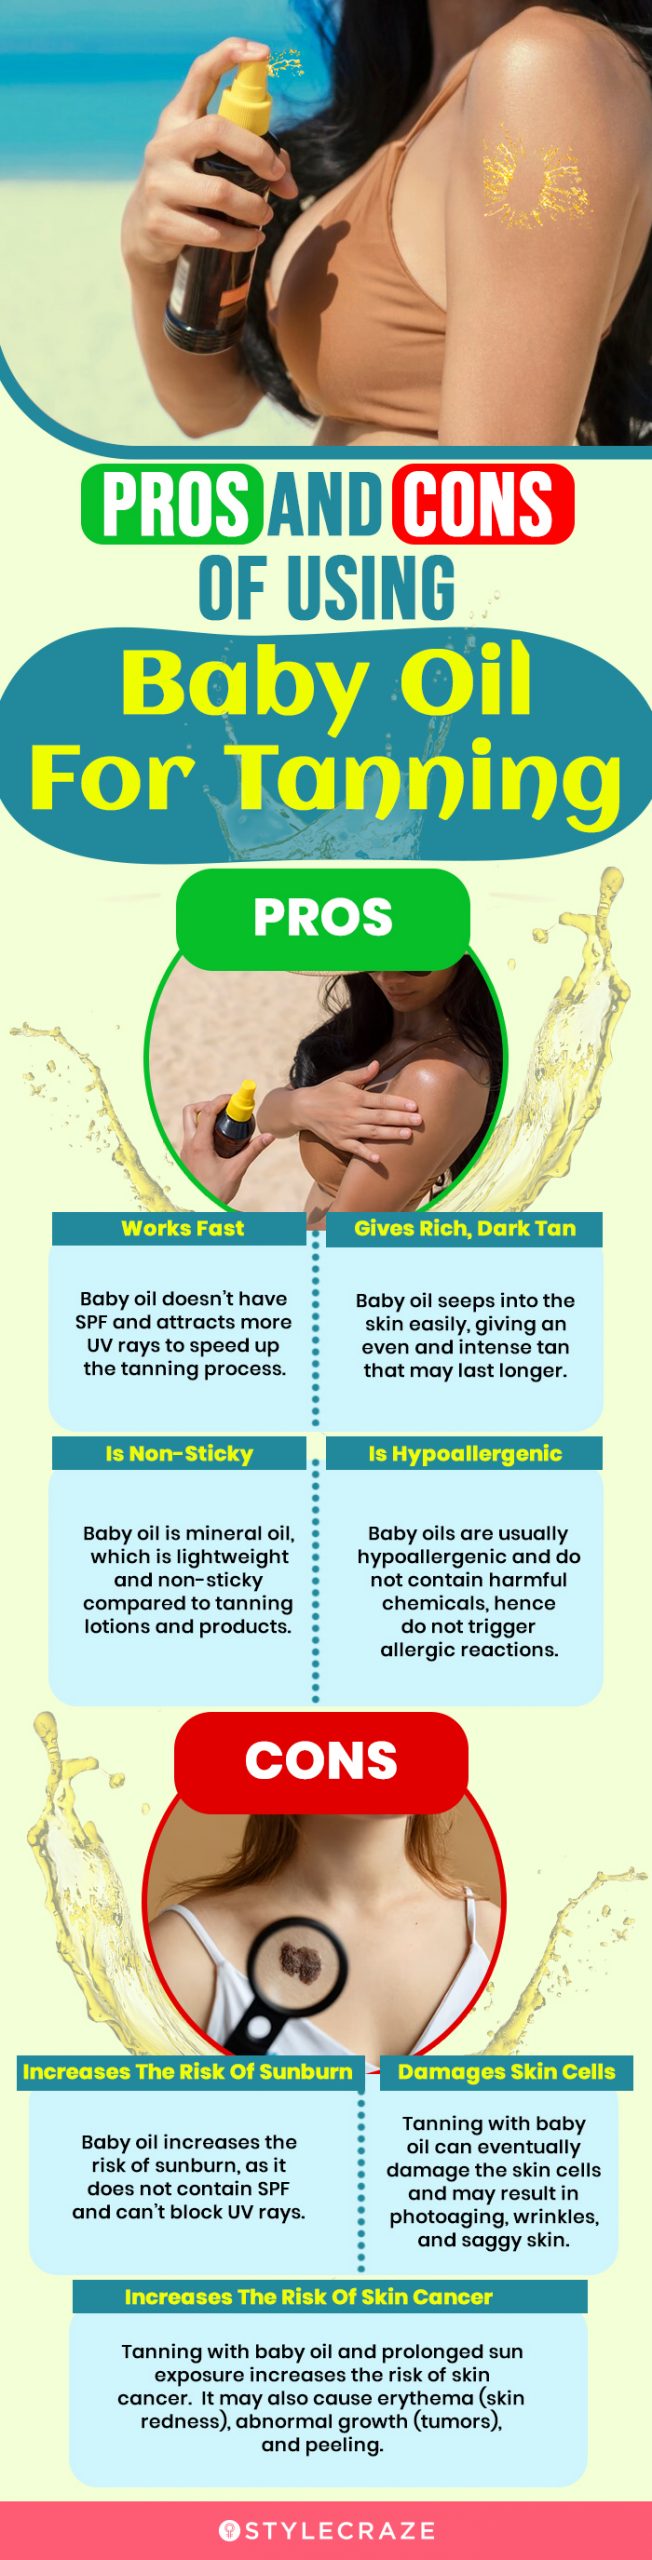 pros and cons of using baby oil for tanning (infographic)